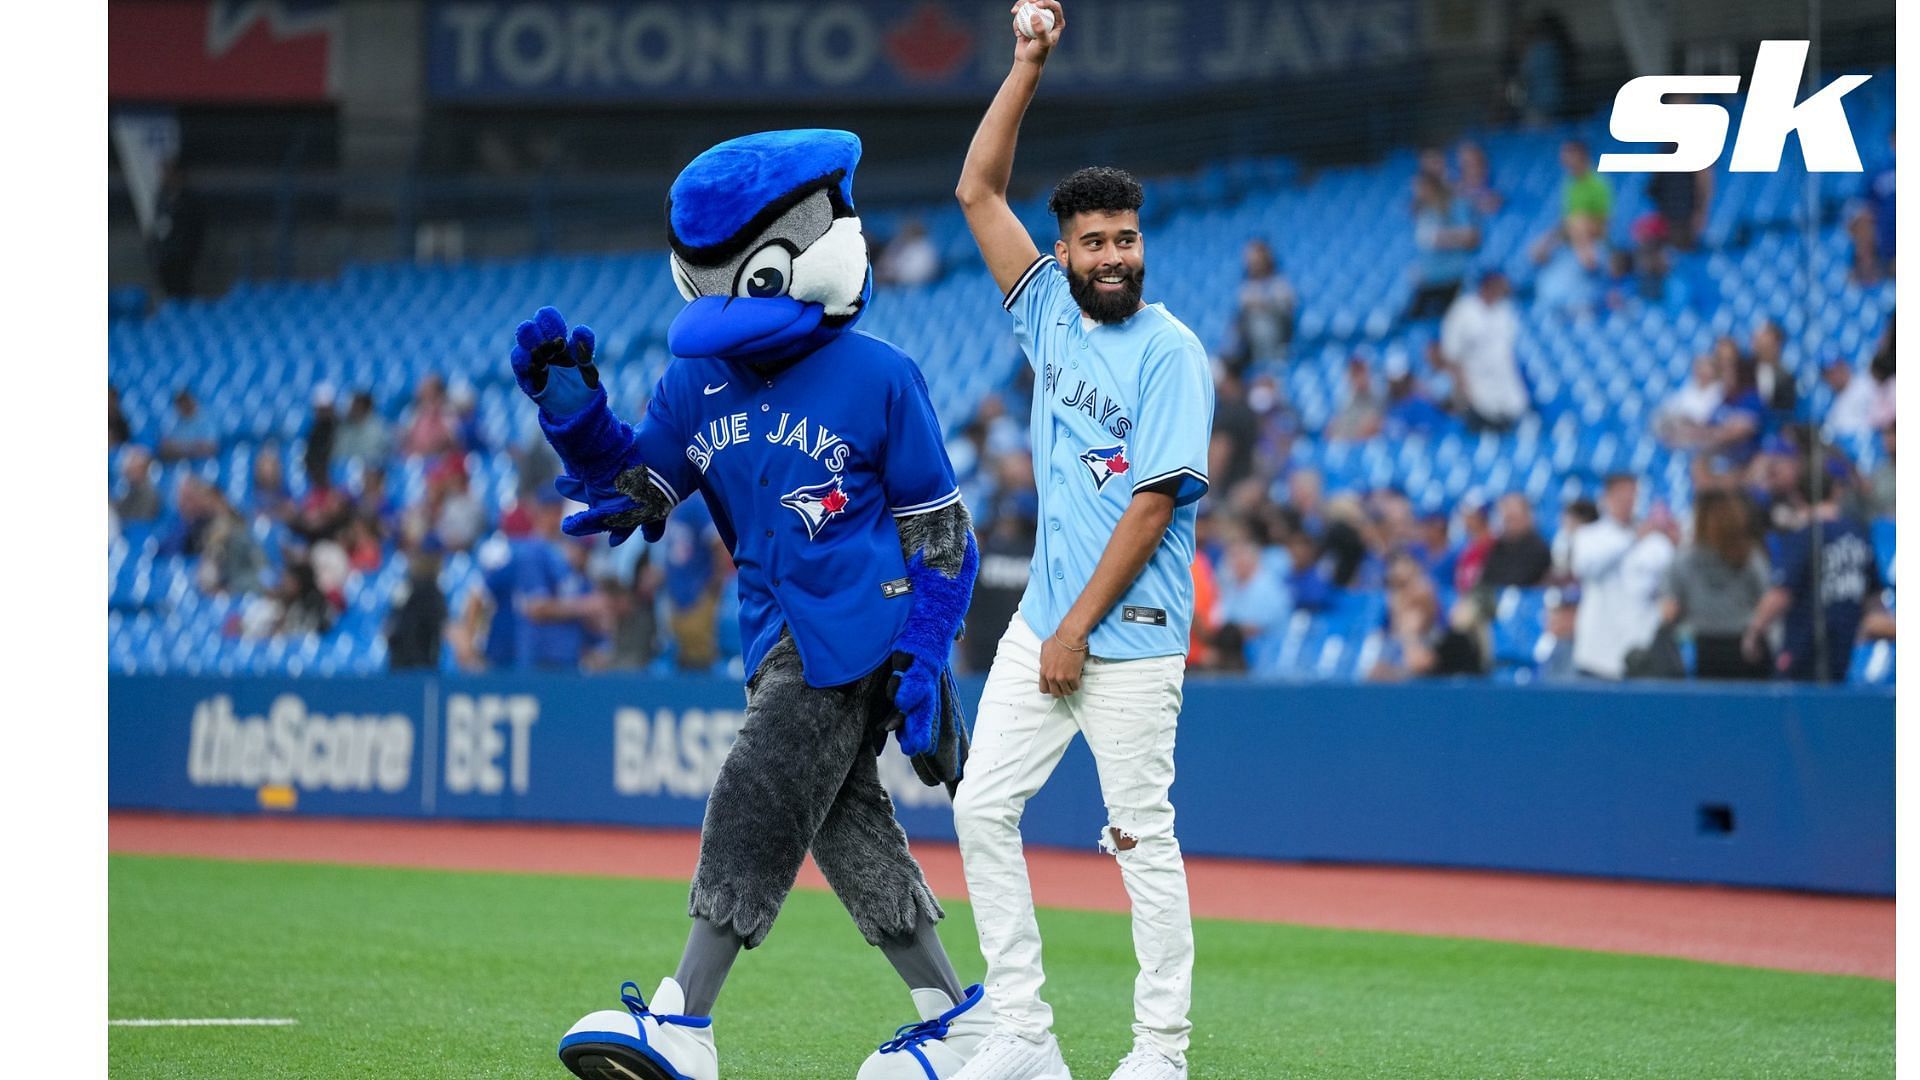 AP Dhillon threw out the ceremonial first pitch for Toronto Blue Jays.